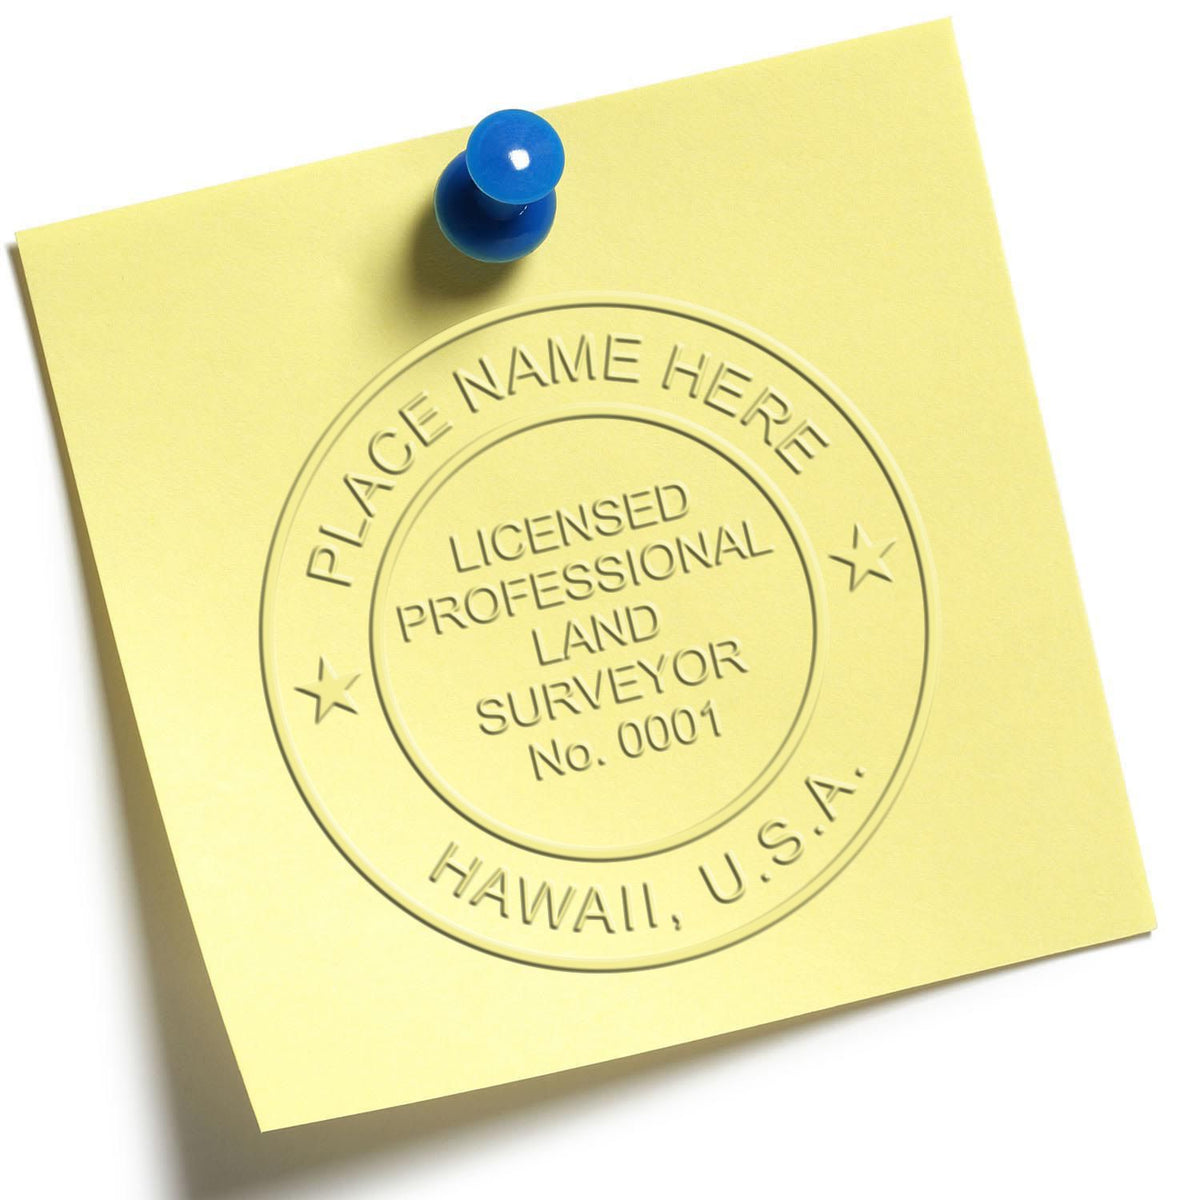 An in use photo of the Gift Hawaii Land Surveyor Seal showing a sample imprint on a cardstock